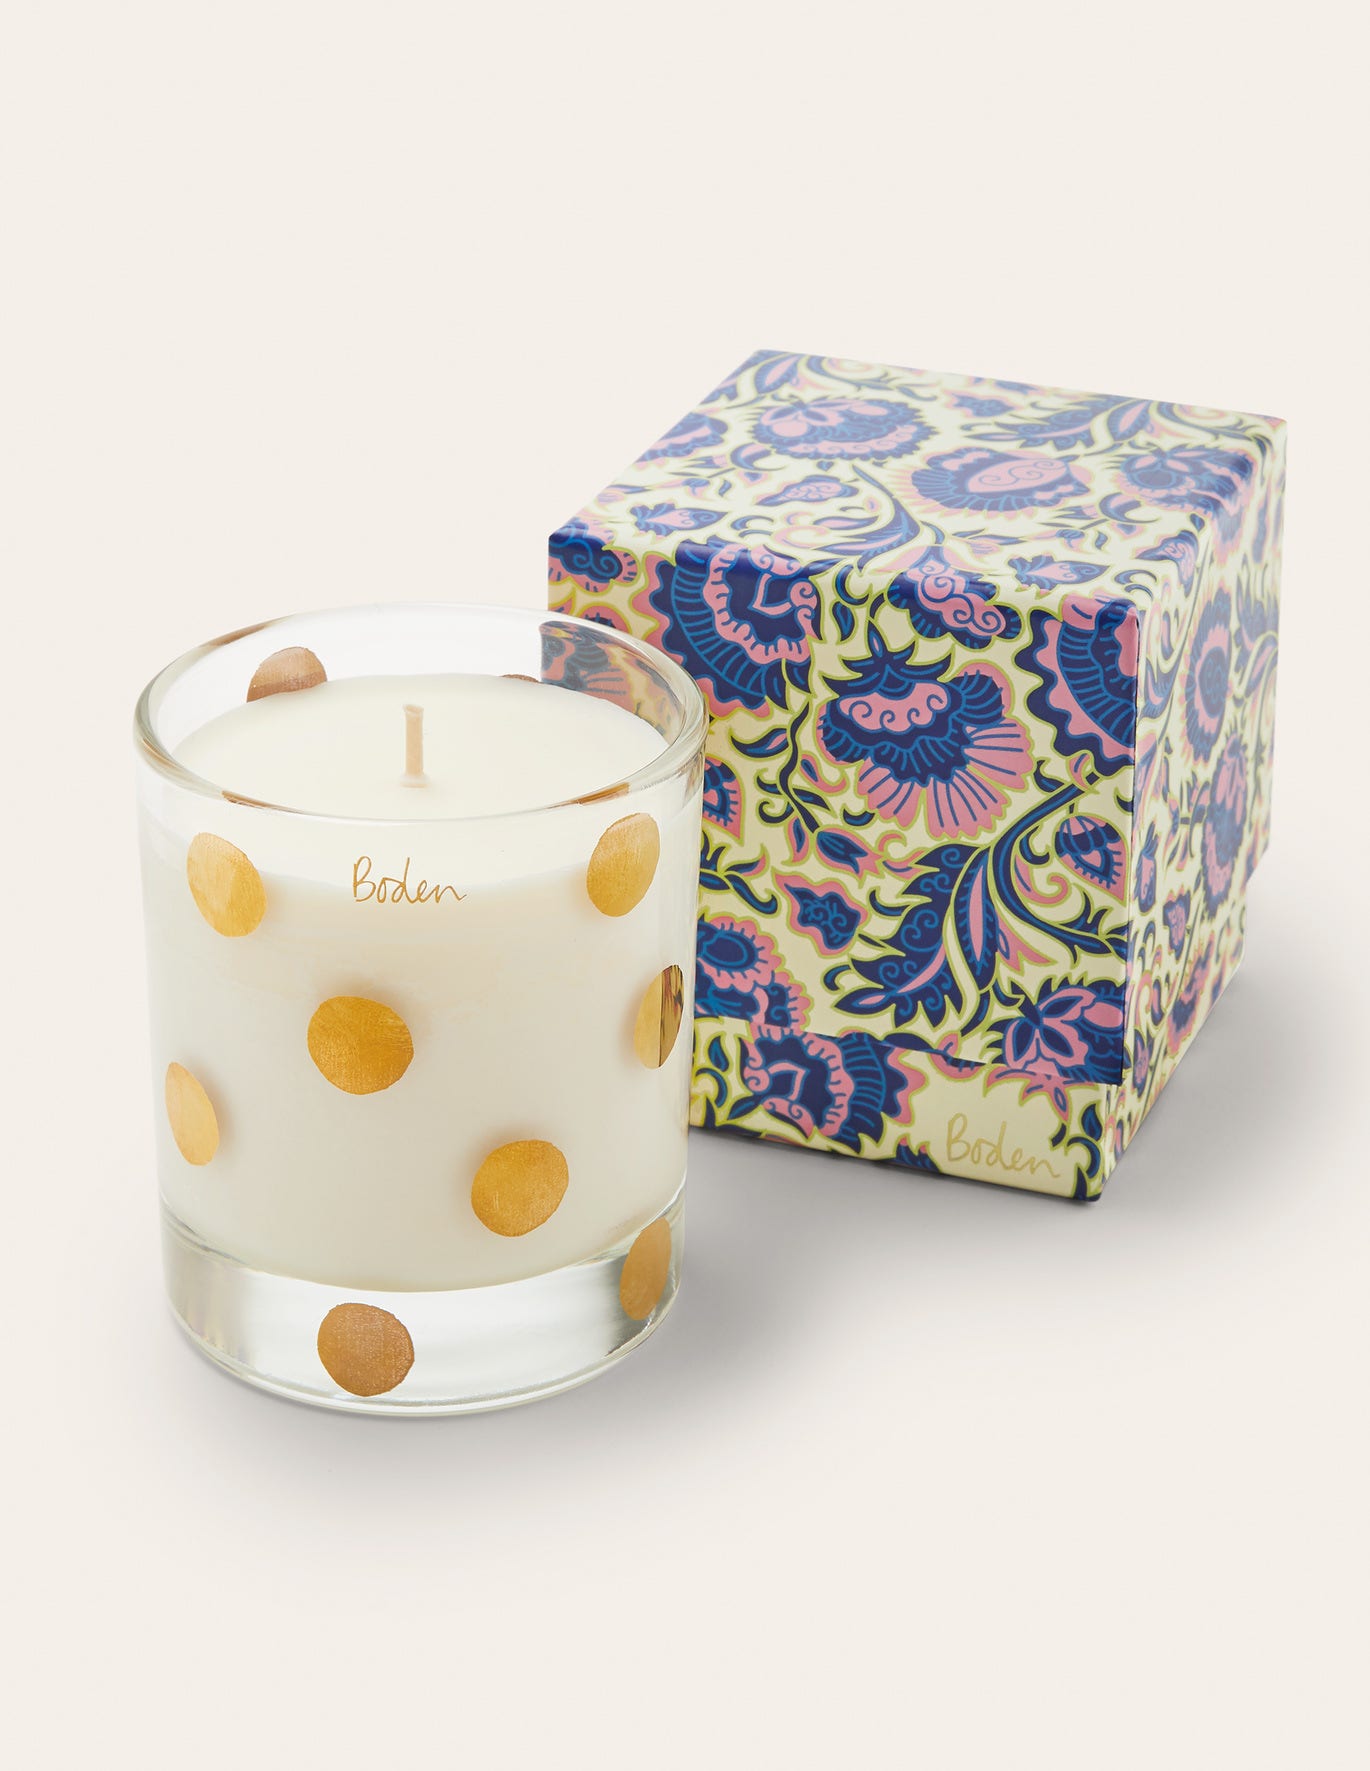 Boden Red Currant Scented Candle - Redcurrant